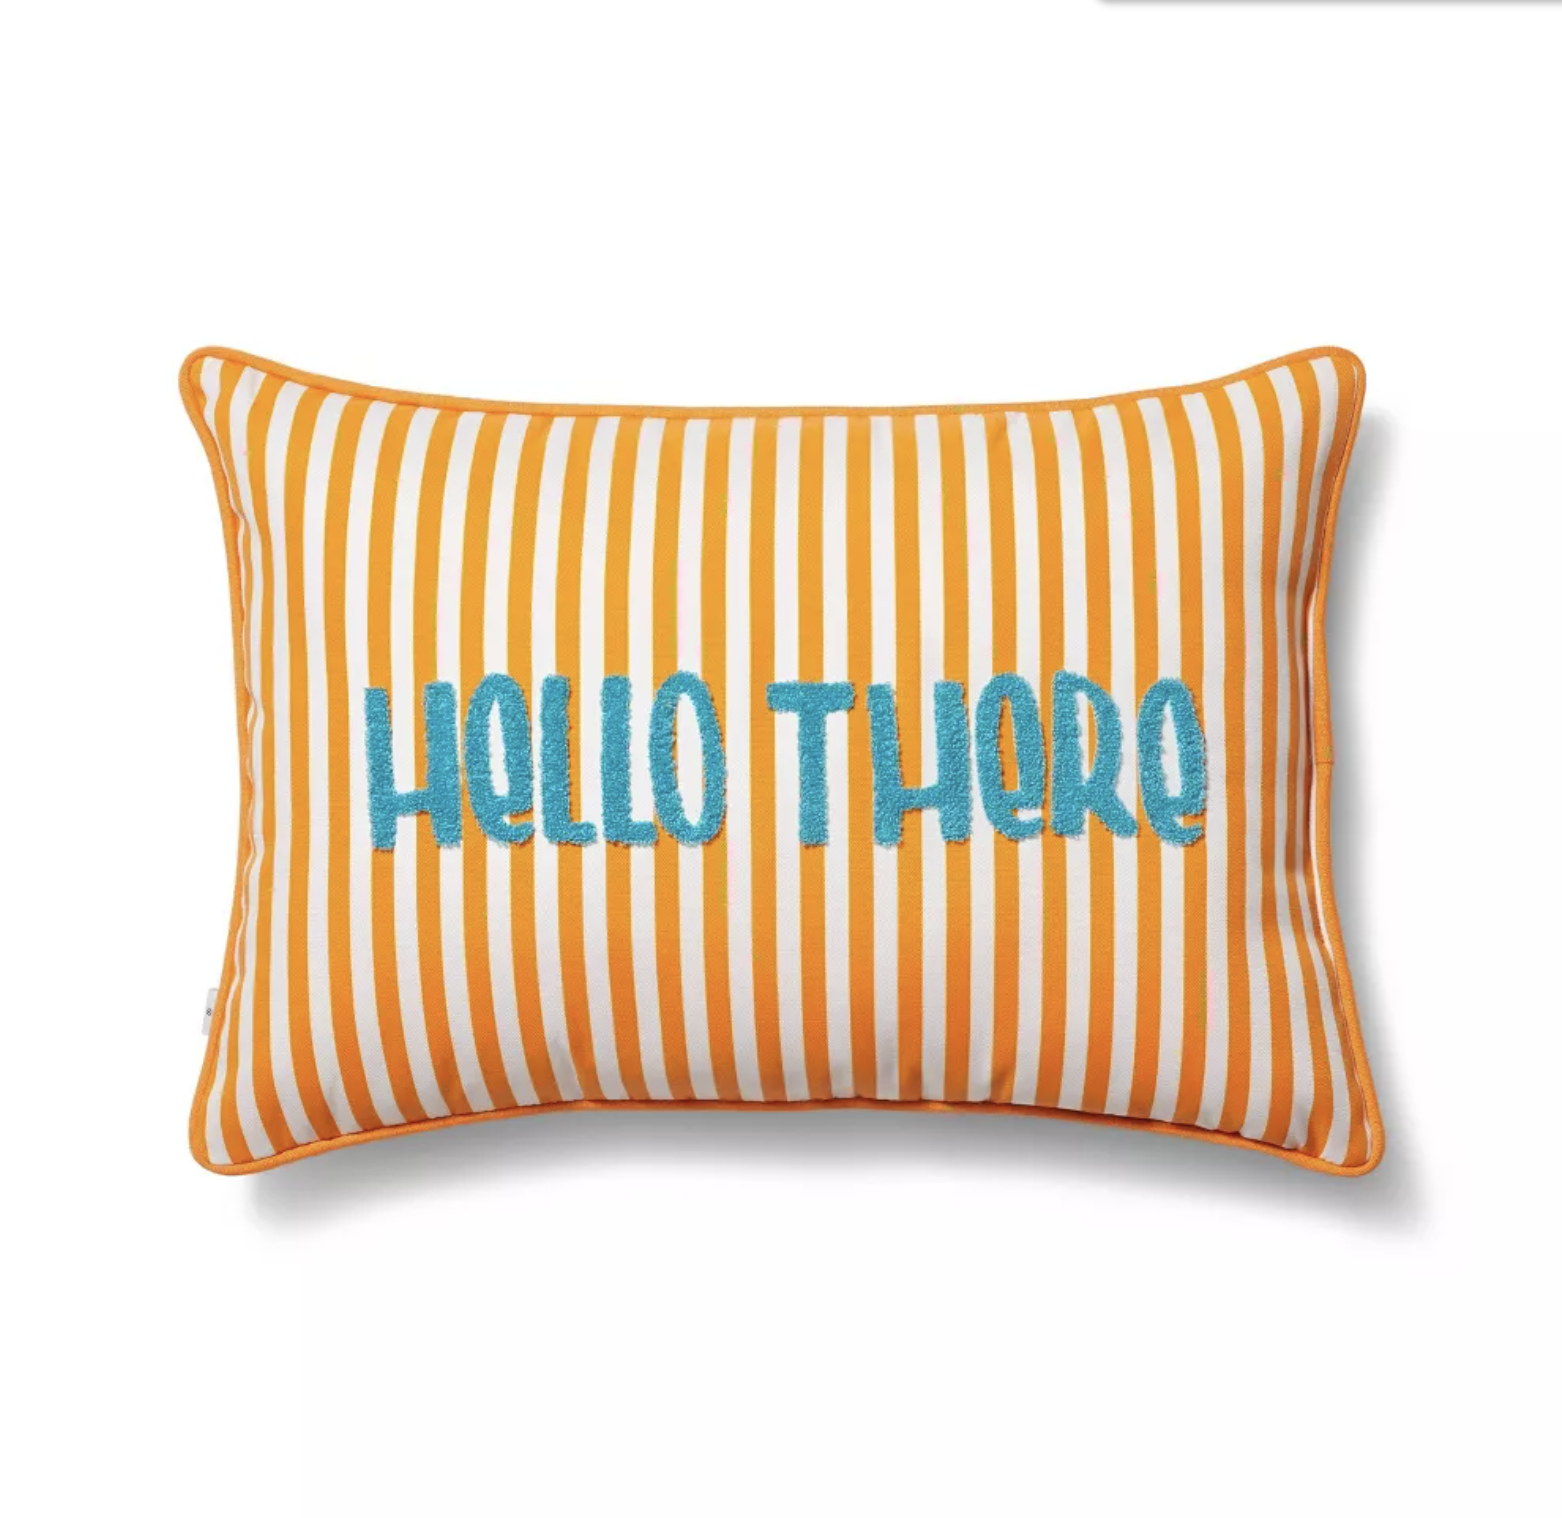 Striped pillow that says hello there on it